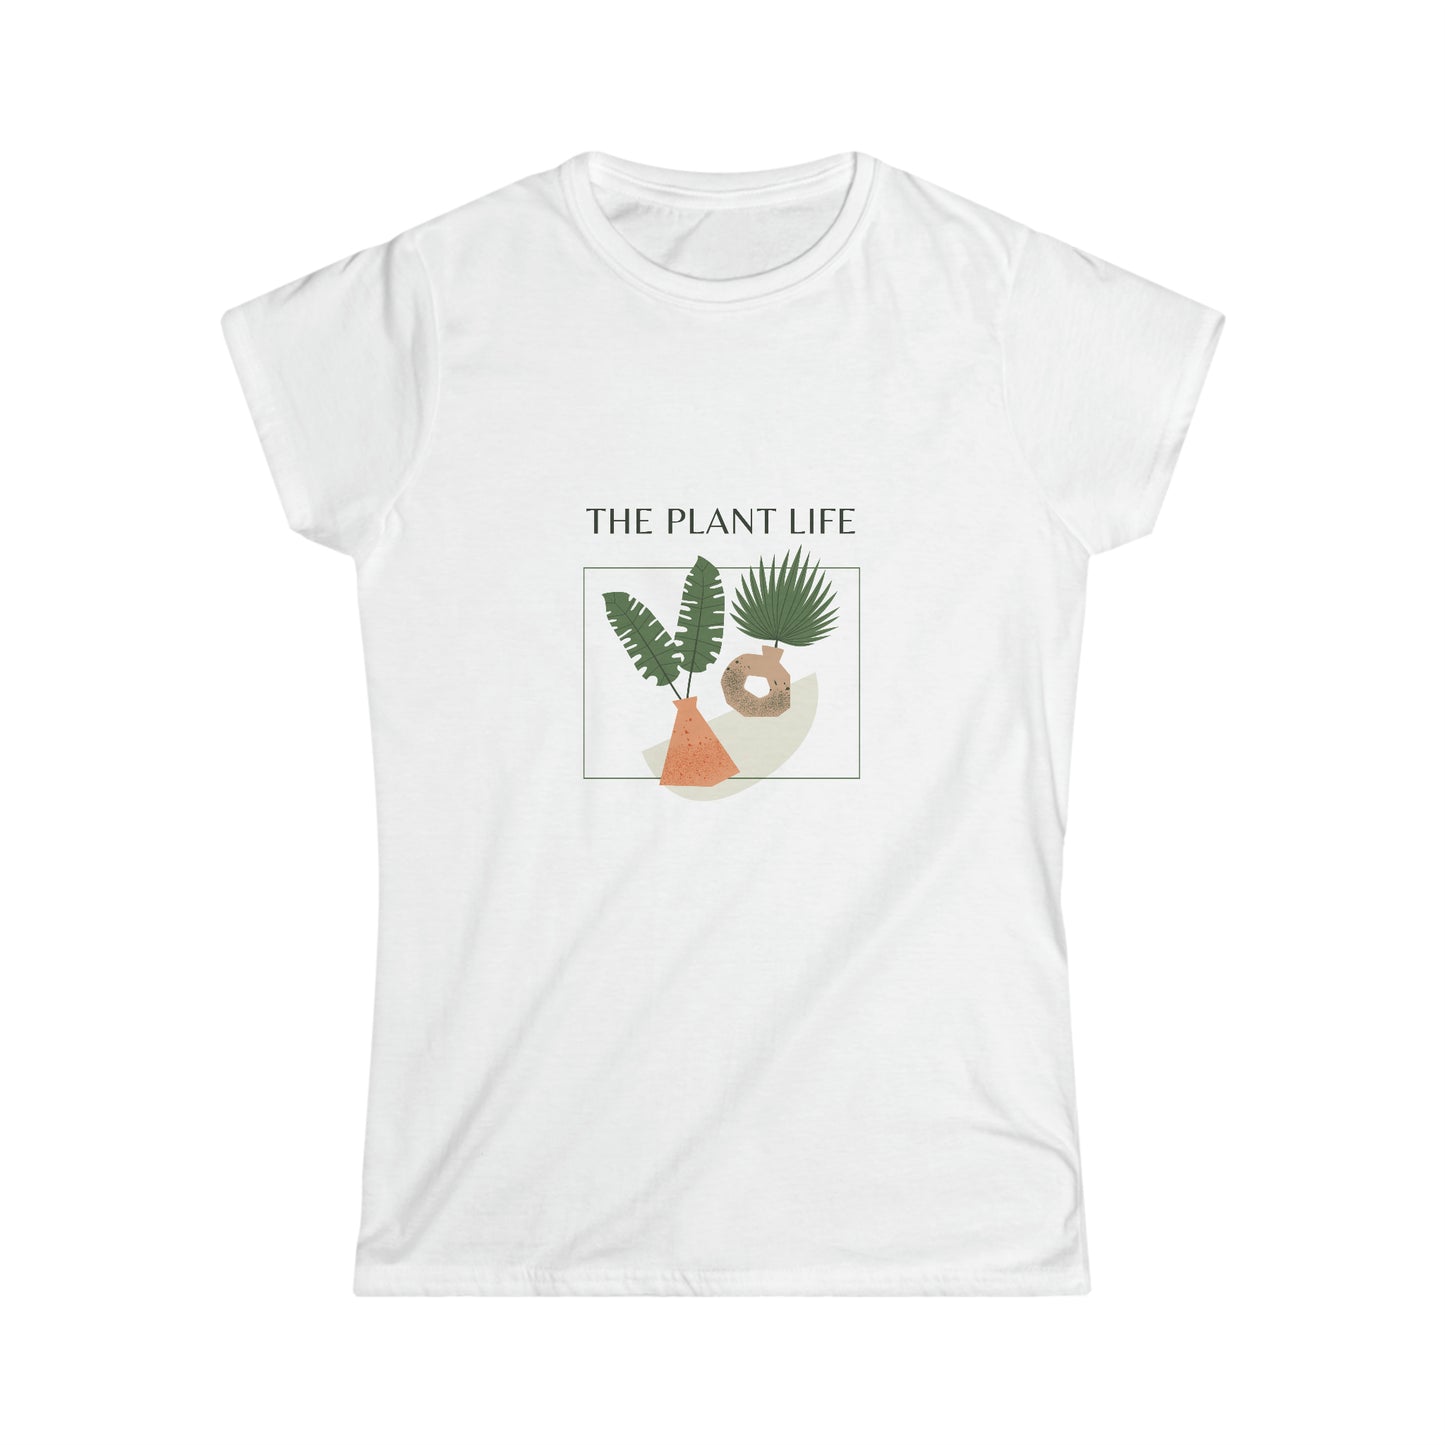 The Plant Life Fun Gardening Fitted T-Shirt for Plant Lovers